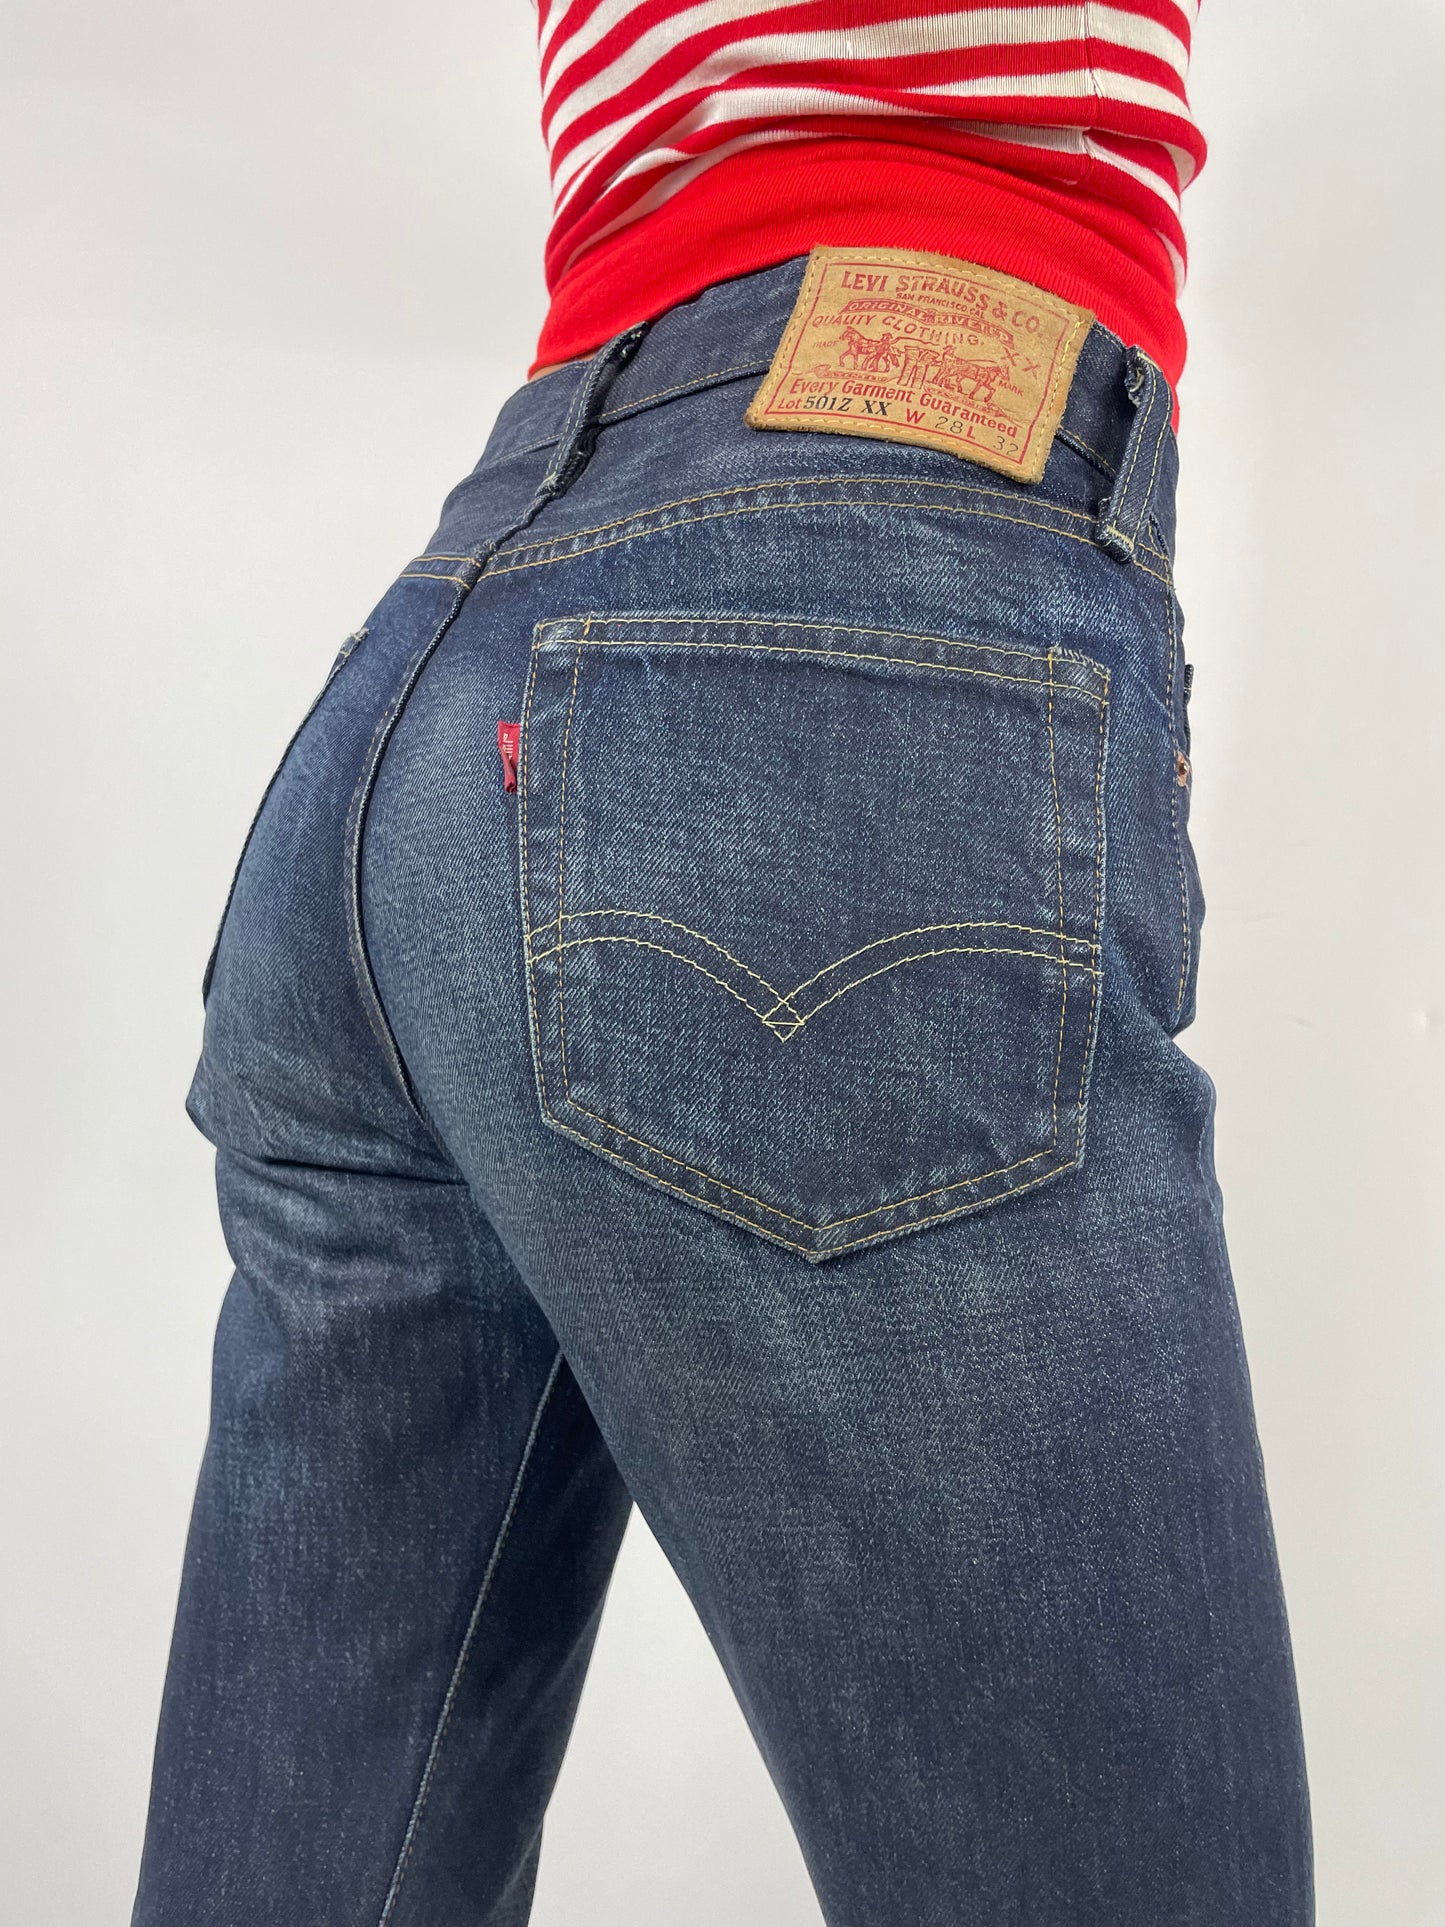 Levi's 501 ZXX Big E with Selvage